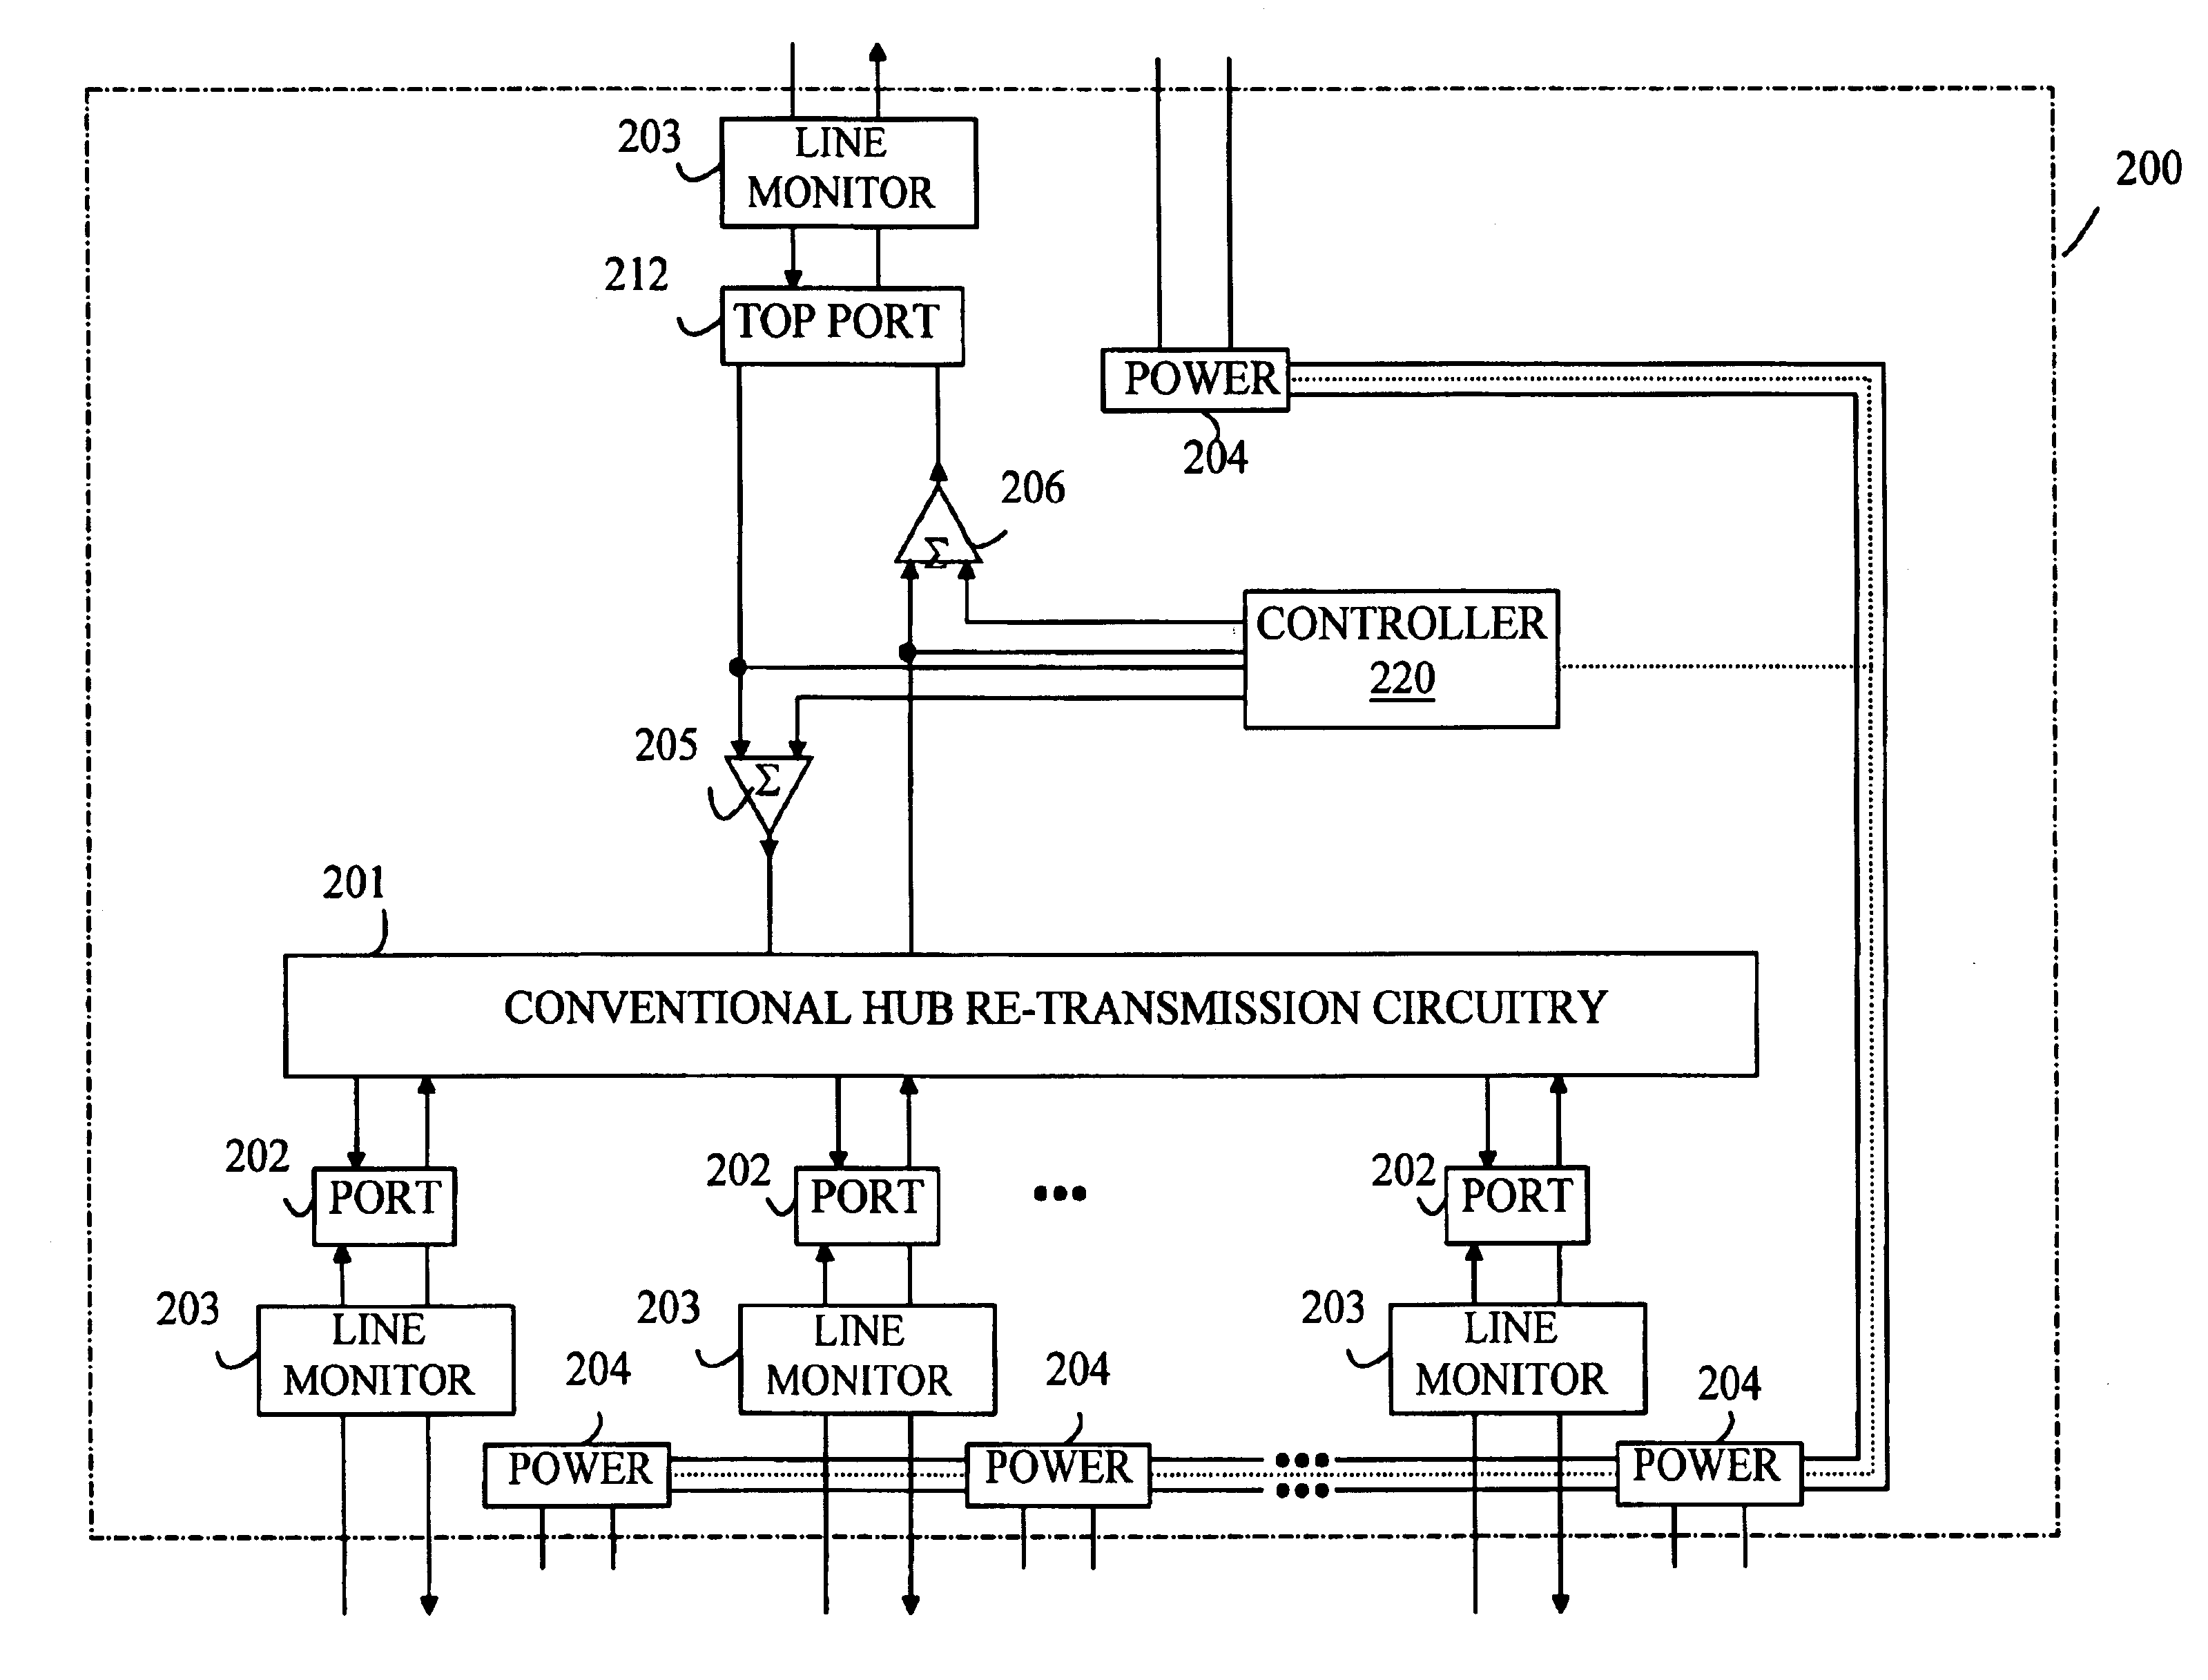 Computer network adapted for industrial environments